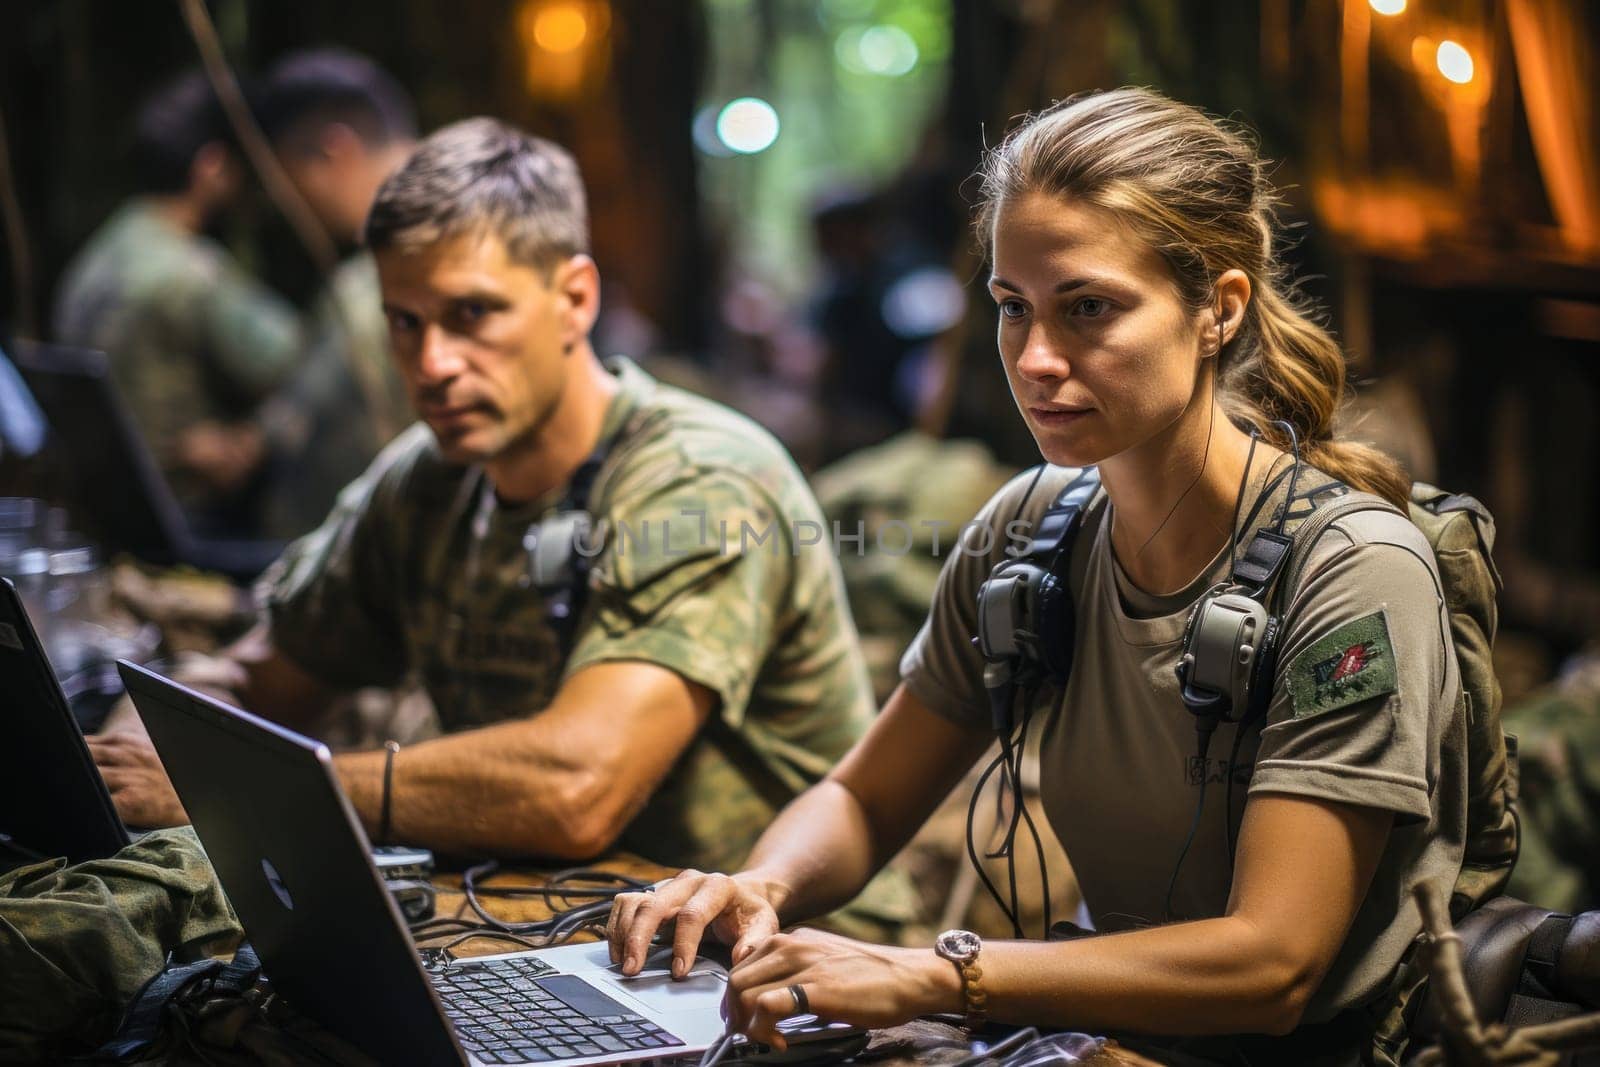 Attentive military personnel in camouflage clothing focus on their duties, working on a laptop, surrounded by the tranquility of a wooded area.